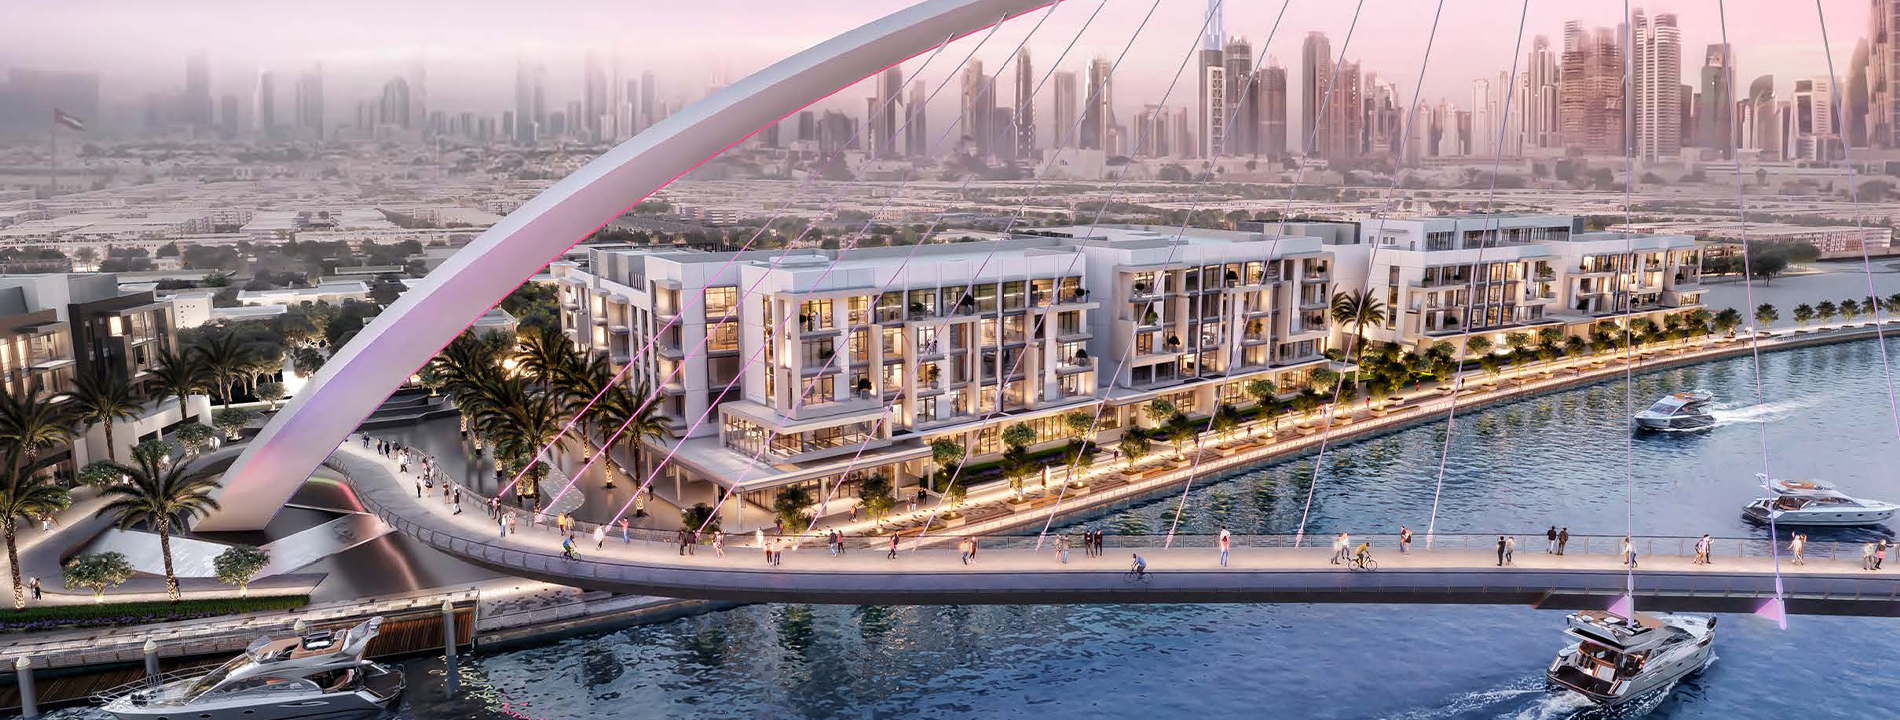 CANAL FRONT RESIDENCE -  MEYDAN GROUP